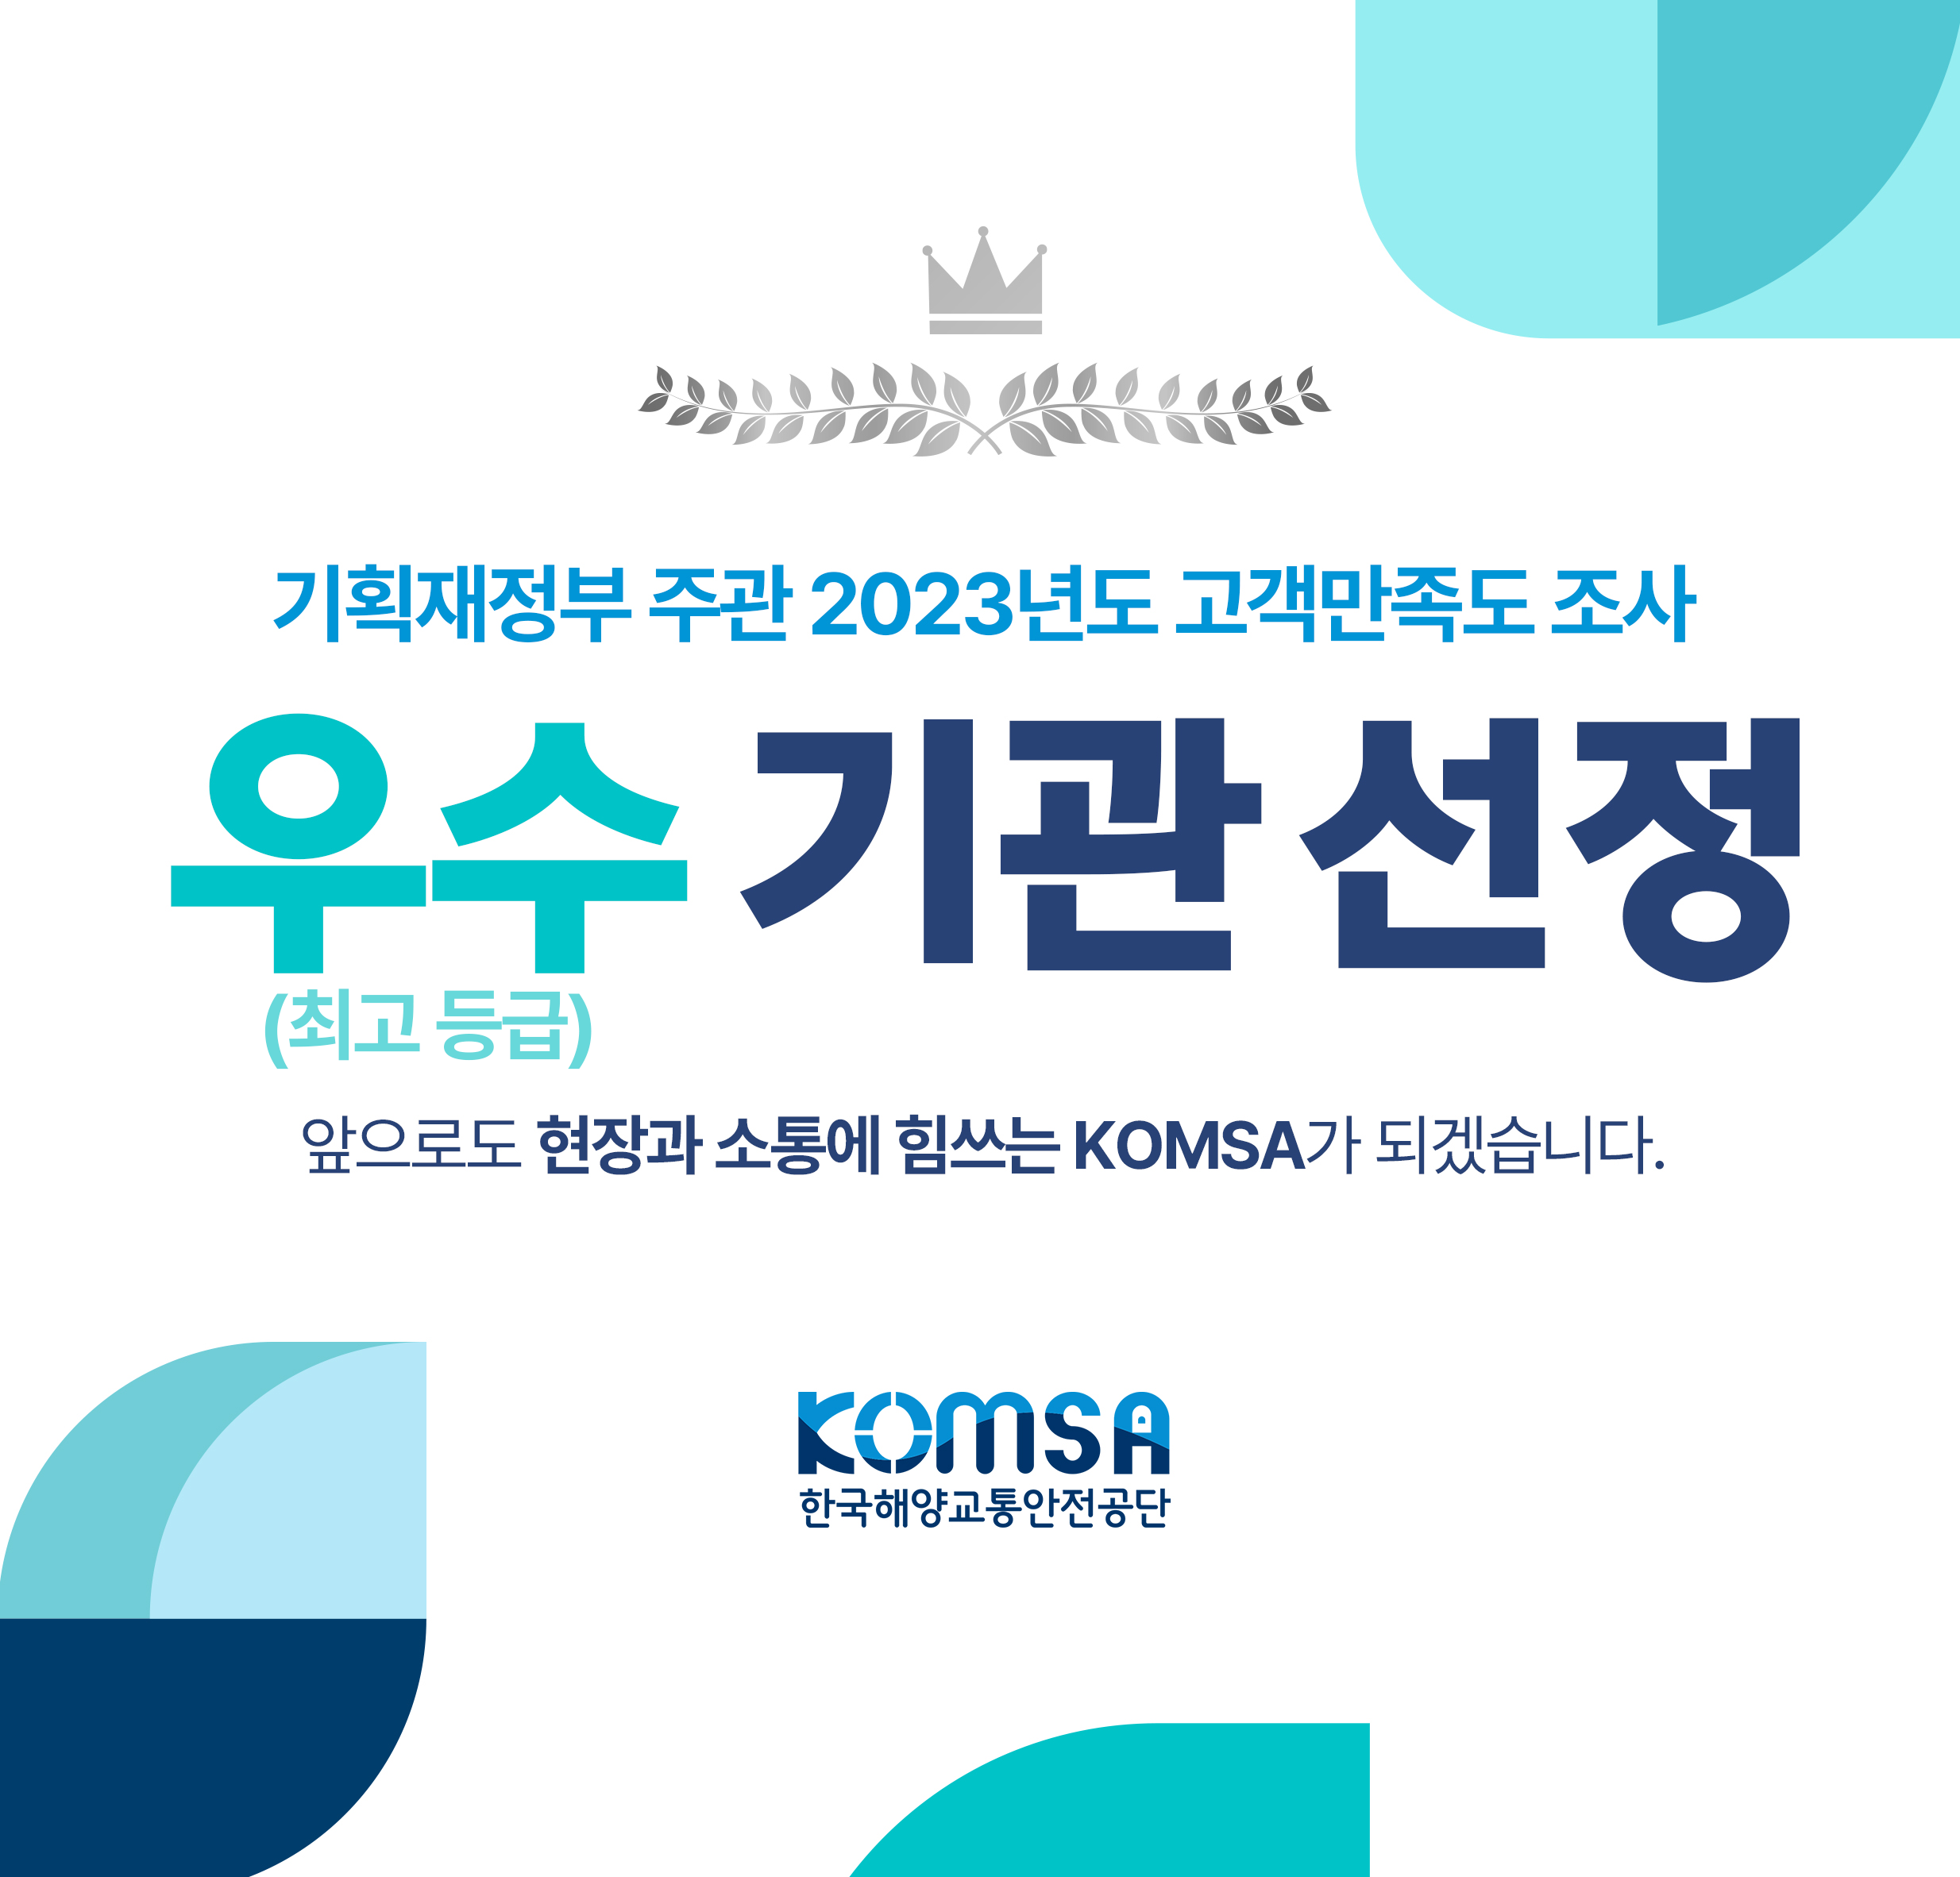 https://komsa.or.kr/kor/;jsessionid=A8284C4D0F53F12AAACACD0BF0E58E4B